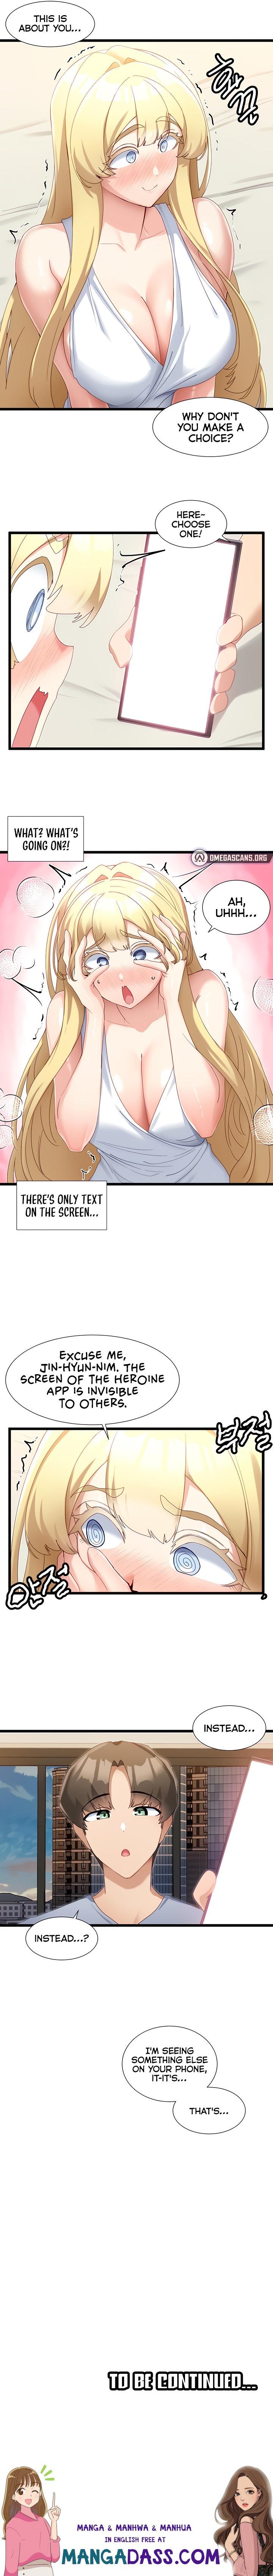 Heroine App - Chapter 32 Page 15